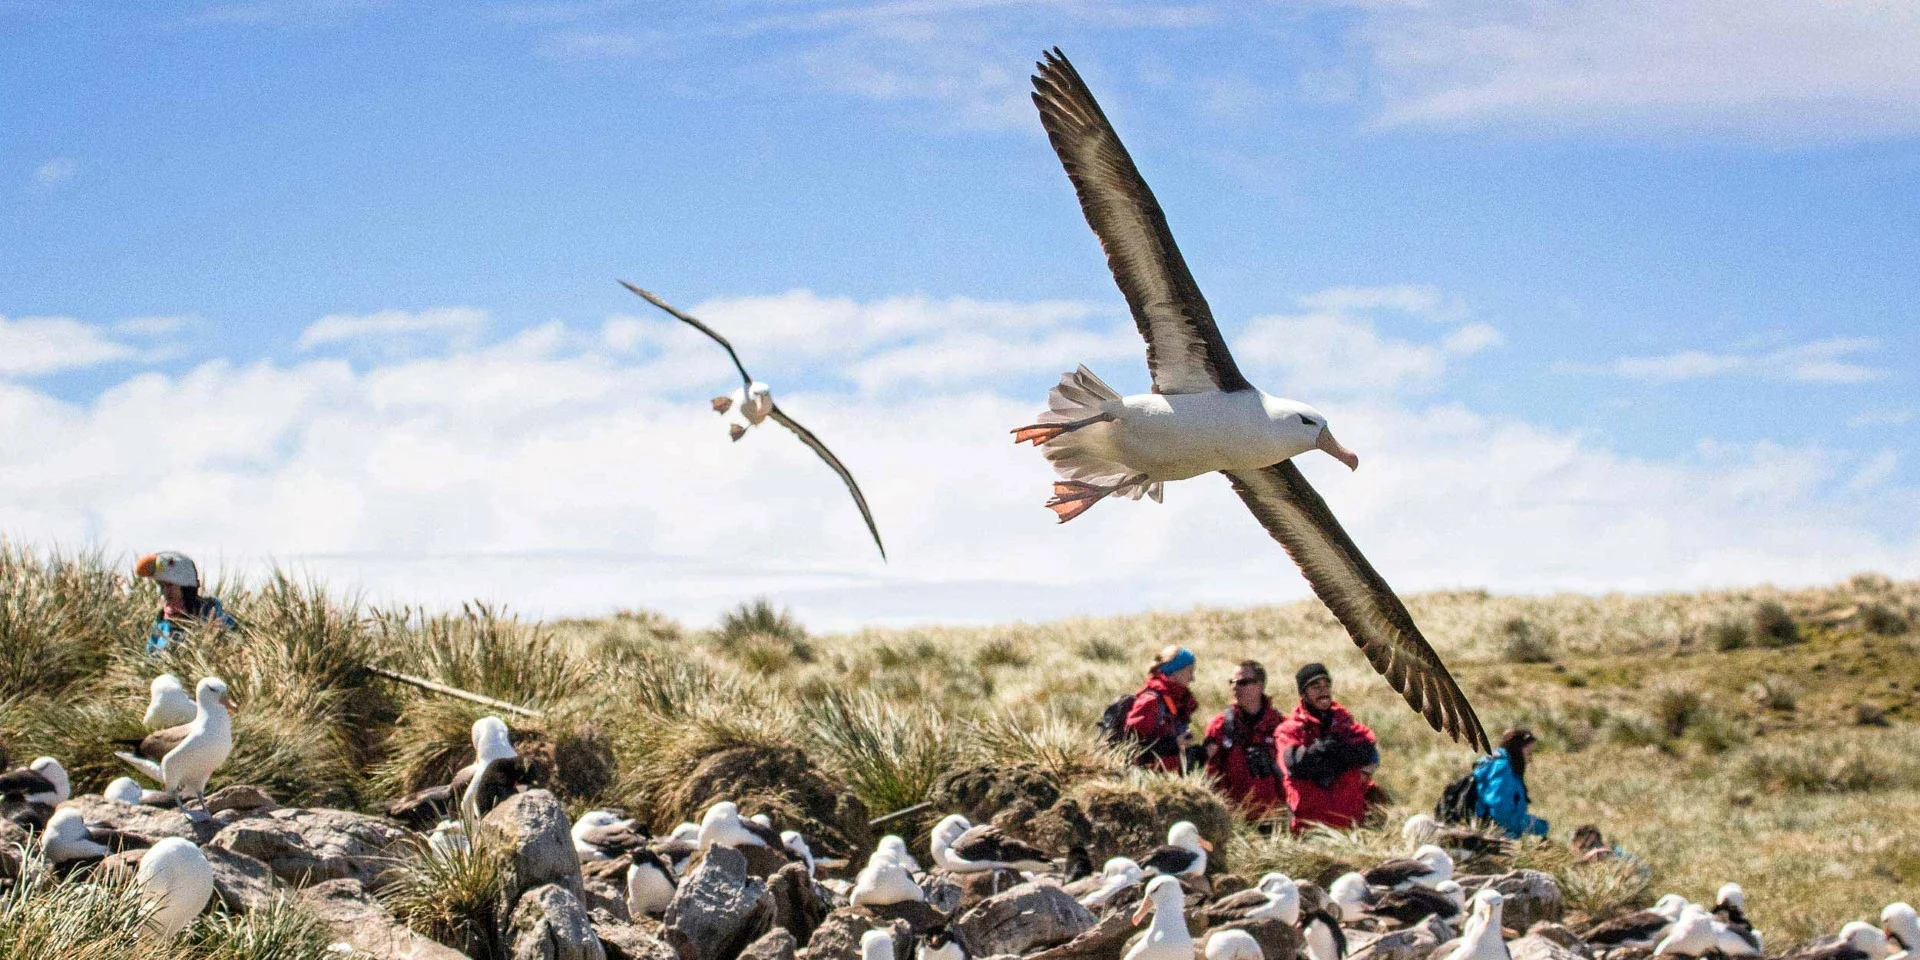 A traveller's guide to the Falkand Islands